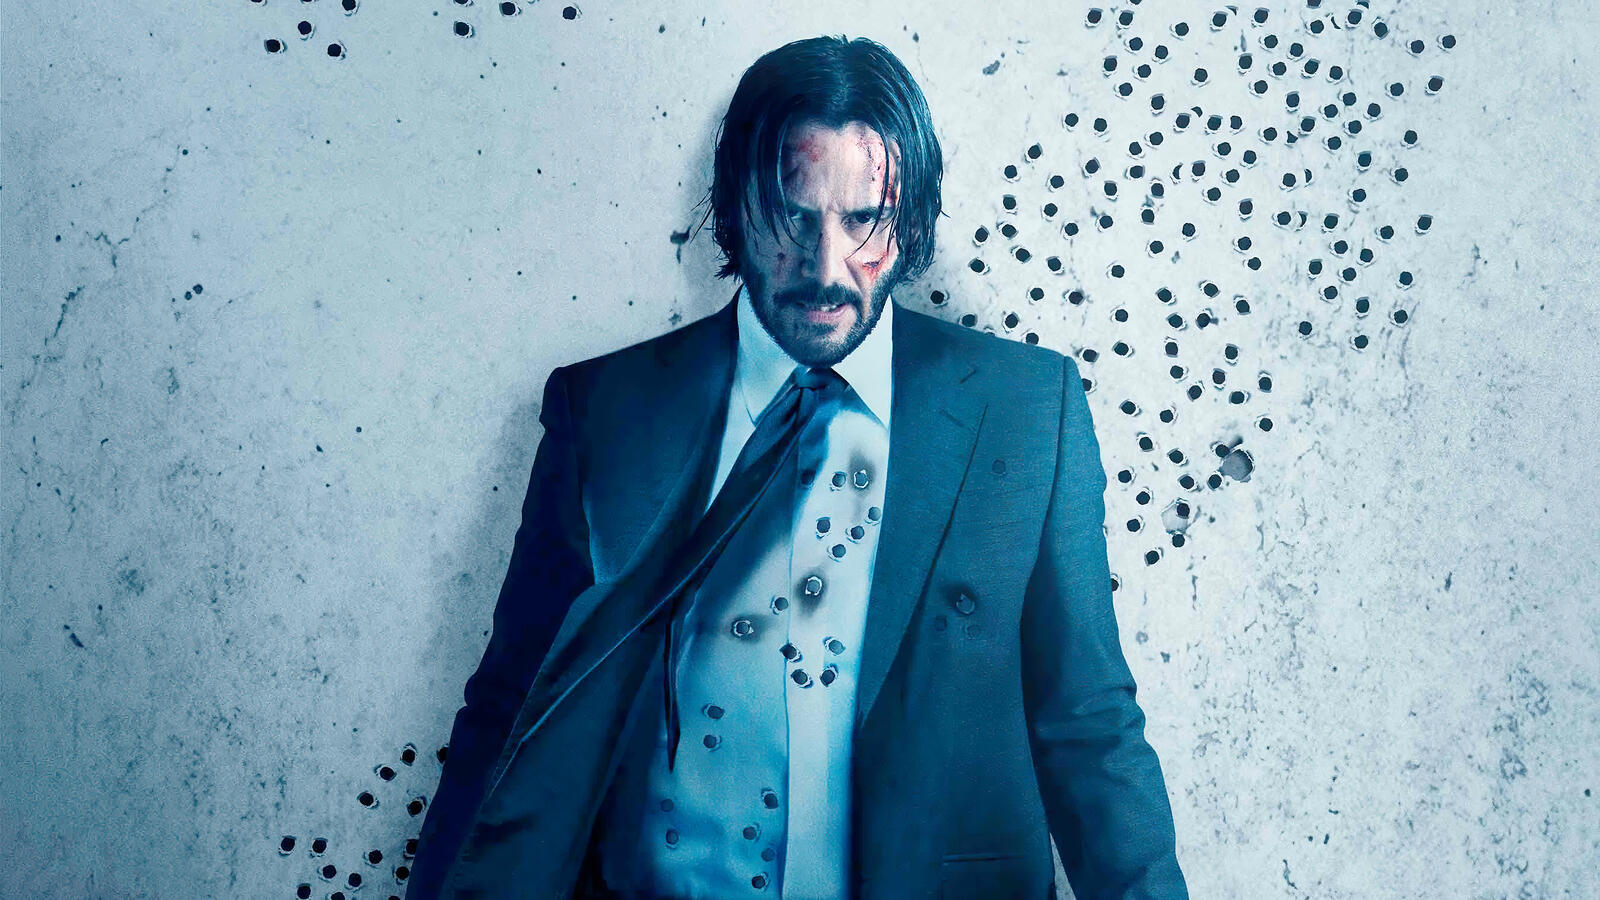 Free photo John Wick stands at the shot wall